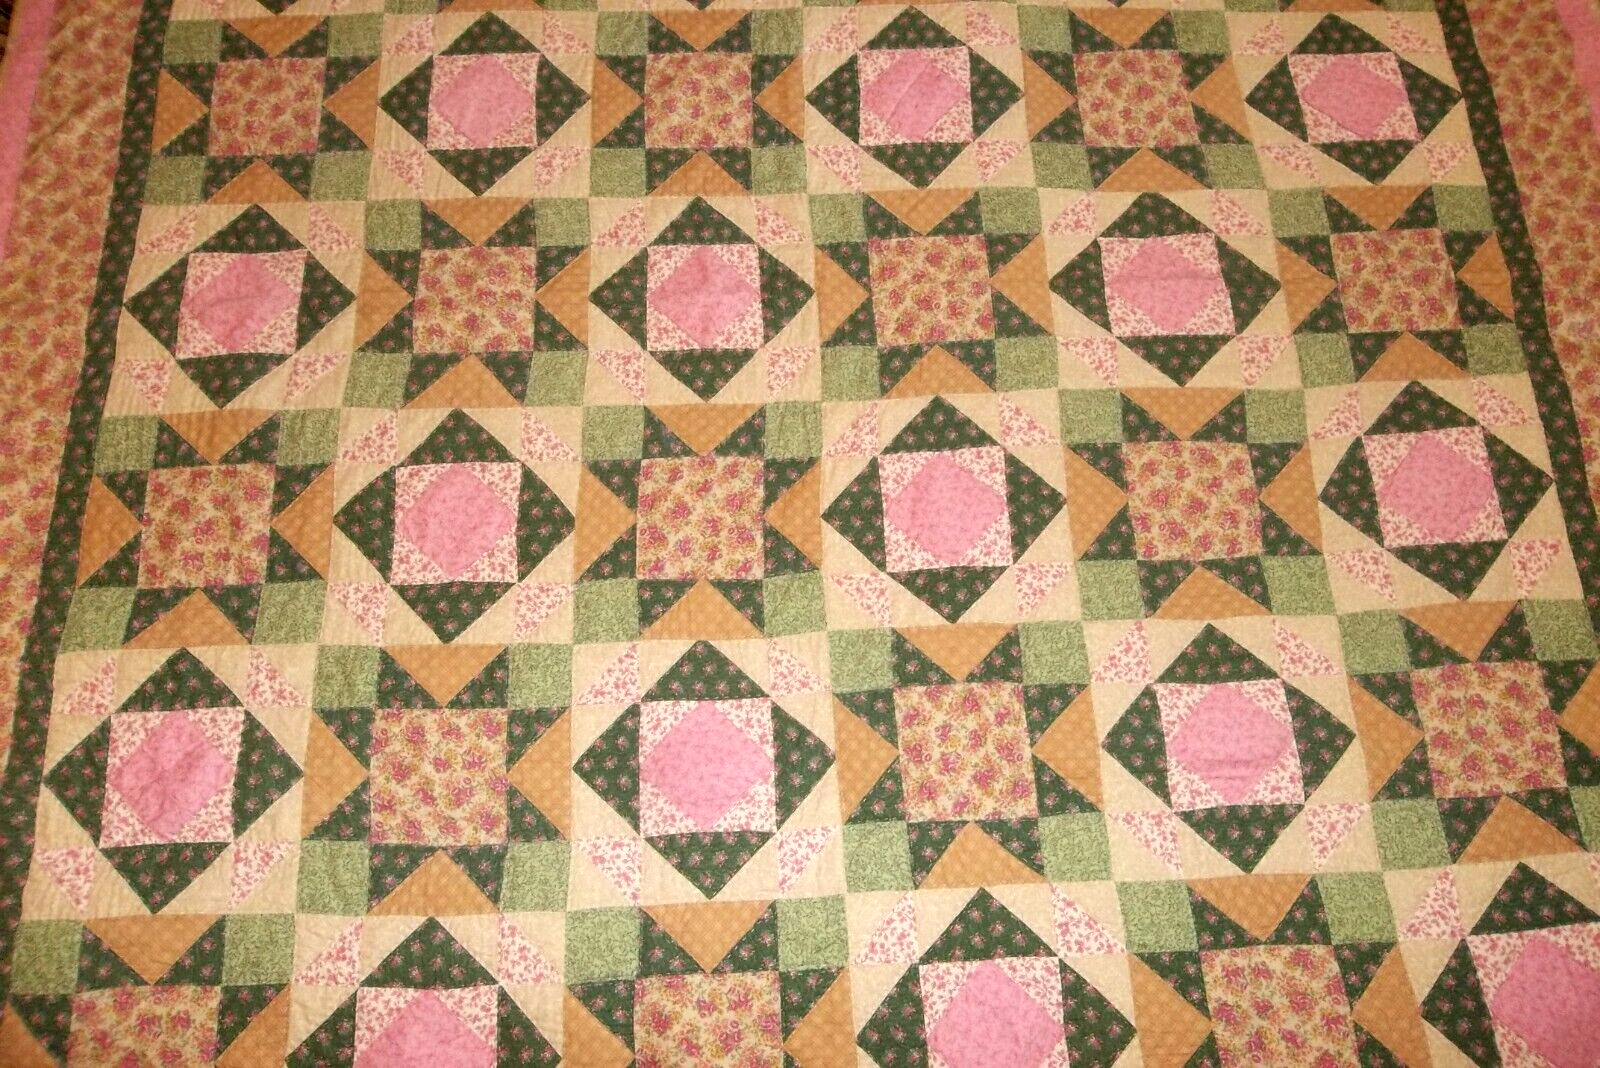 Handmade Star Queen Quilt Antique Style Reproduction Fabric Hand Quilted Vintage